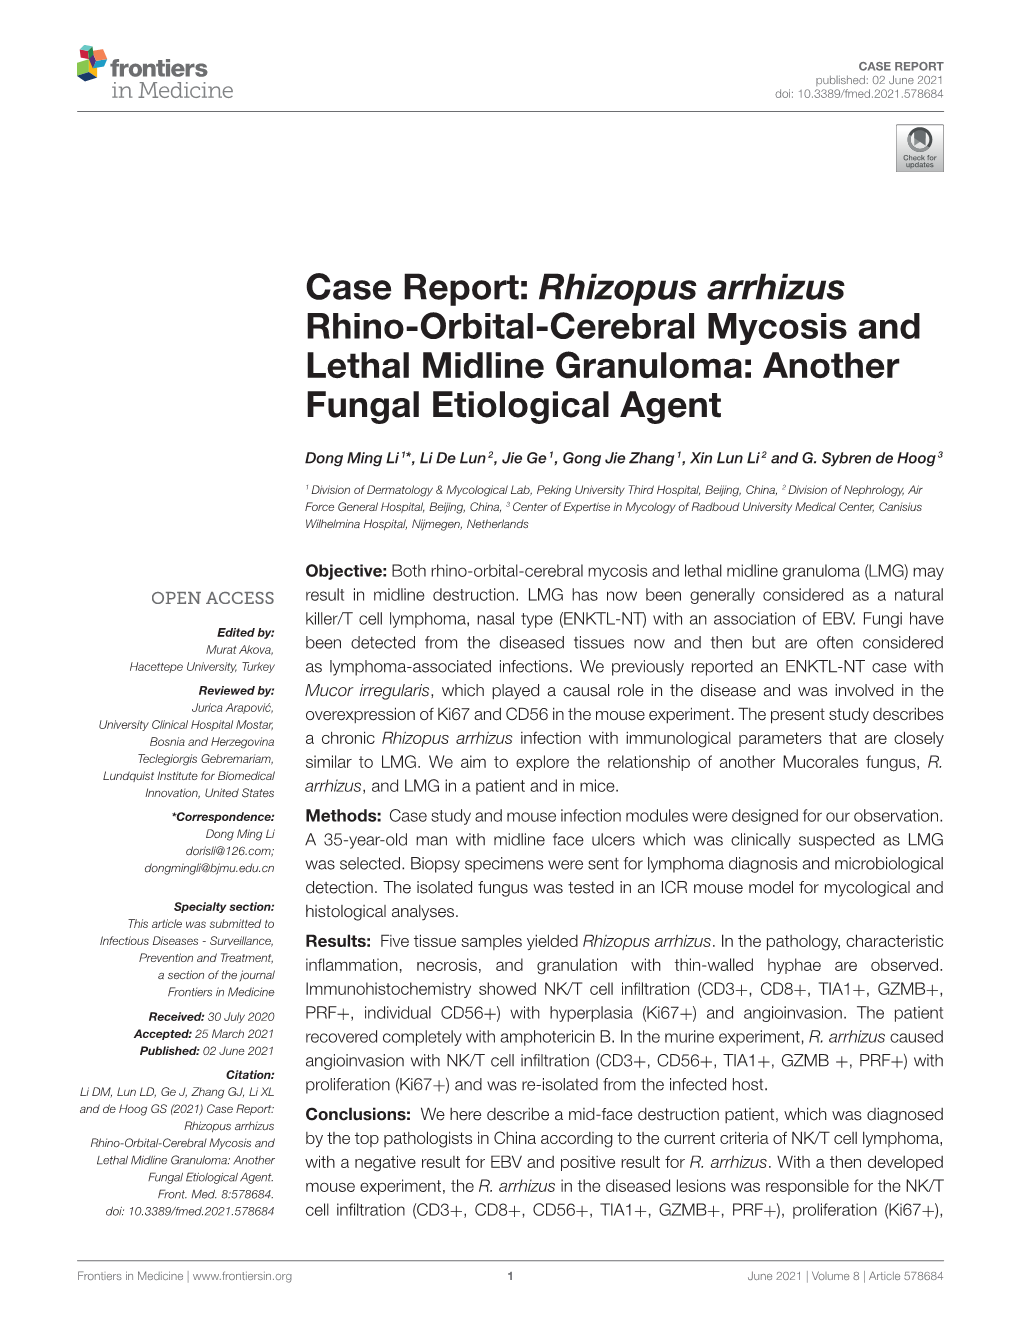 Case Report: Rhizopus Arrhizus Rhino-Orbital-Cerebral Mycosis and Lethal Midline Granuloma: Another Fungal Etiological Agent